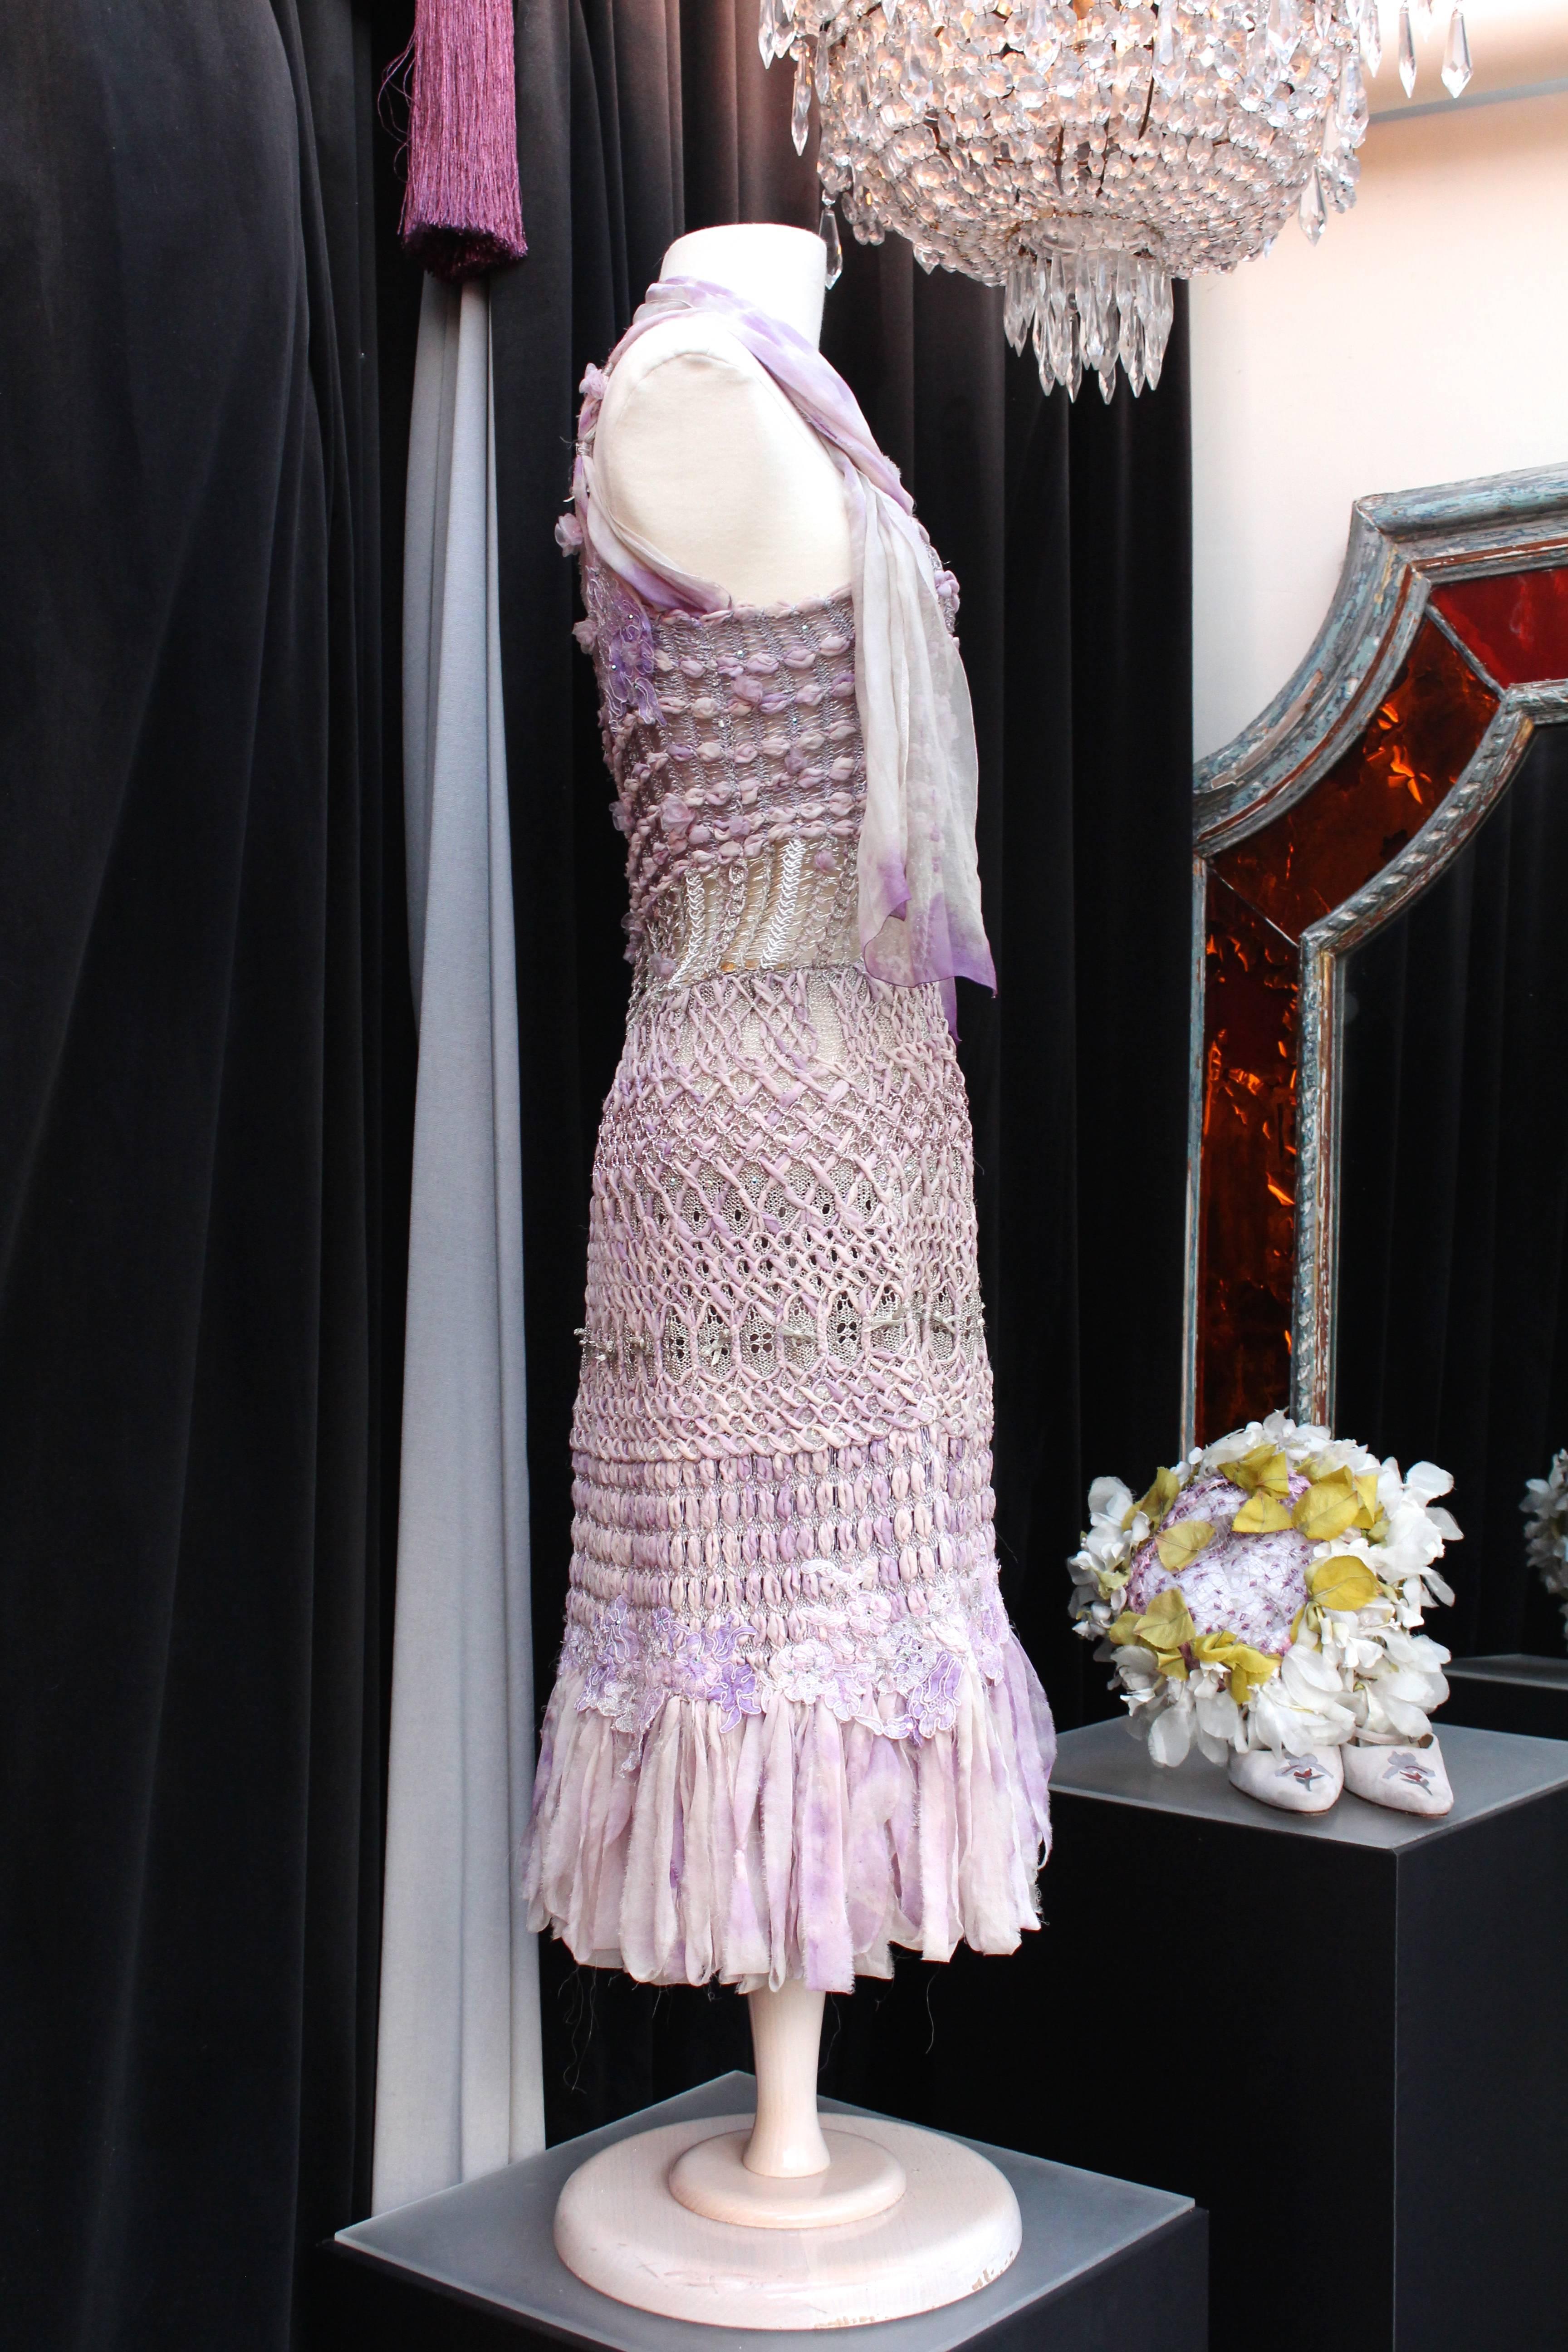 CHRISTIAN LACROIX (Haute Couture) Dress composed of knitting crochet of several fabric in parma tie and dye shades interlaced with silk muslin and lame threads and adorned with multiple small silver metal bows and white Swarovki crystals displayed